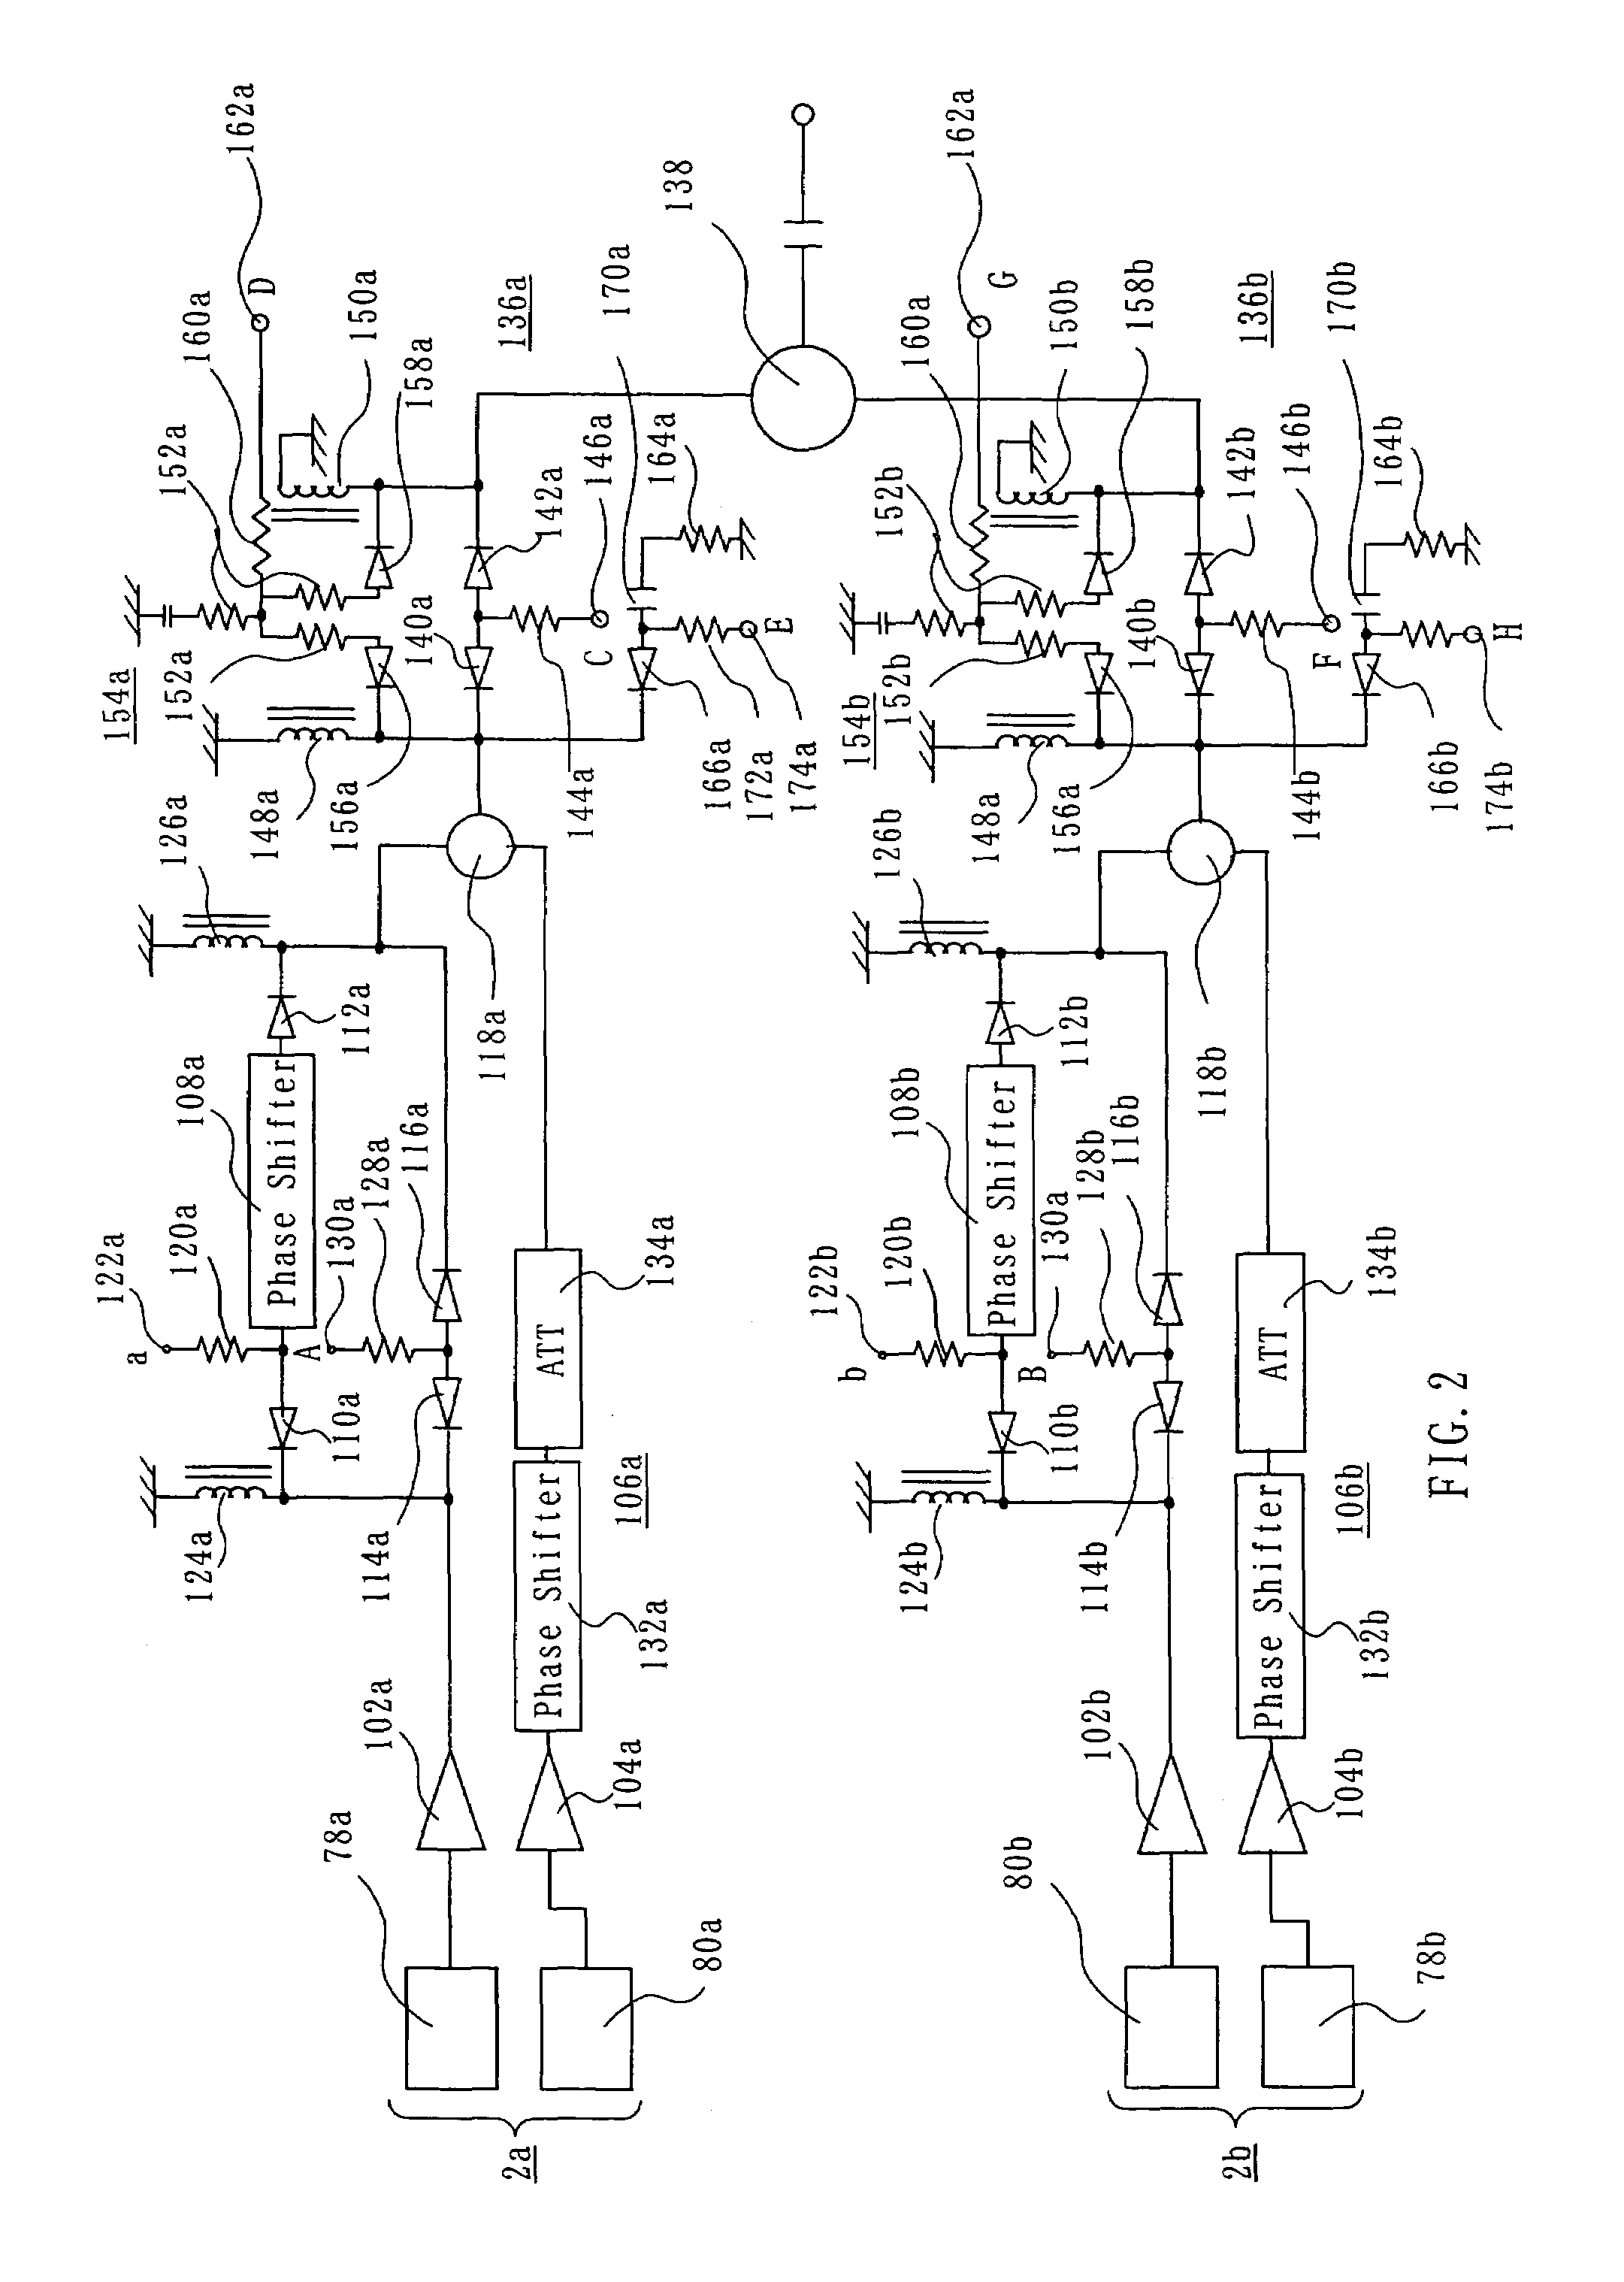 Multiple frequency band antenna and signal receiving system using such antenna